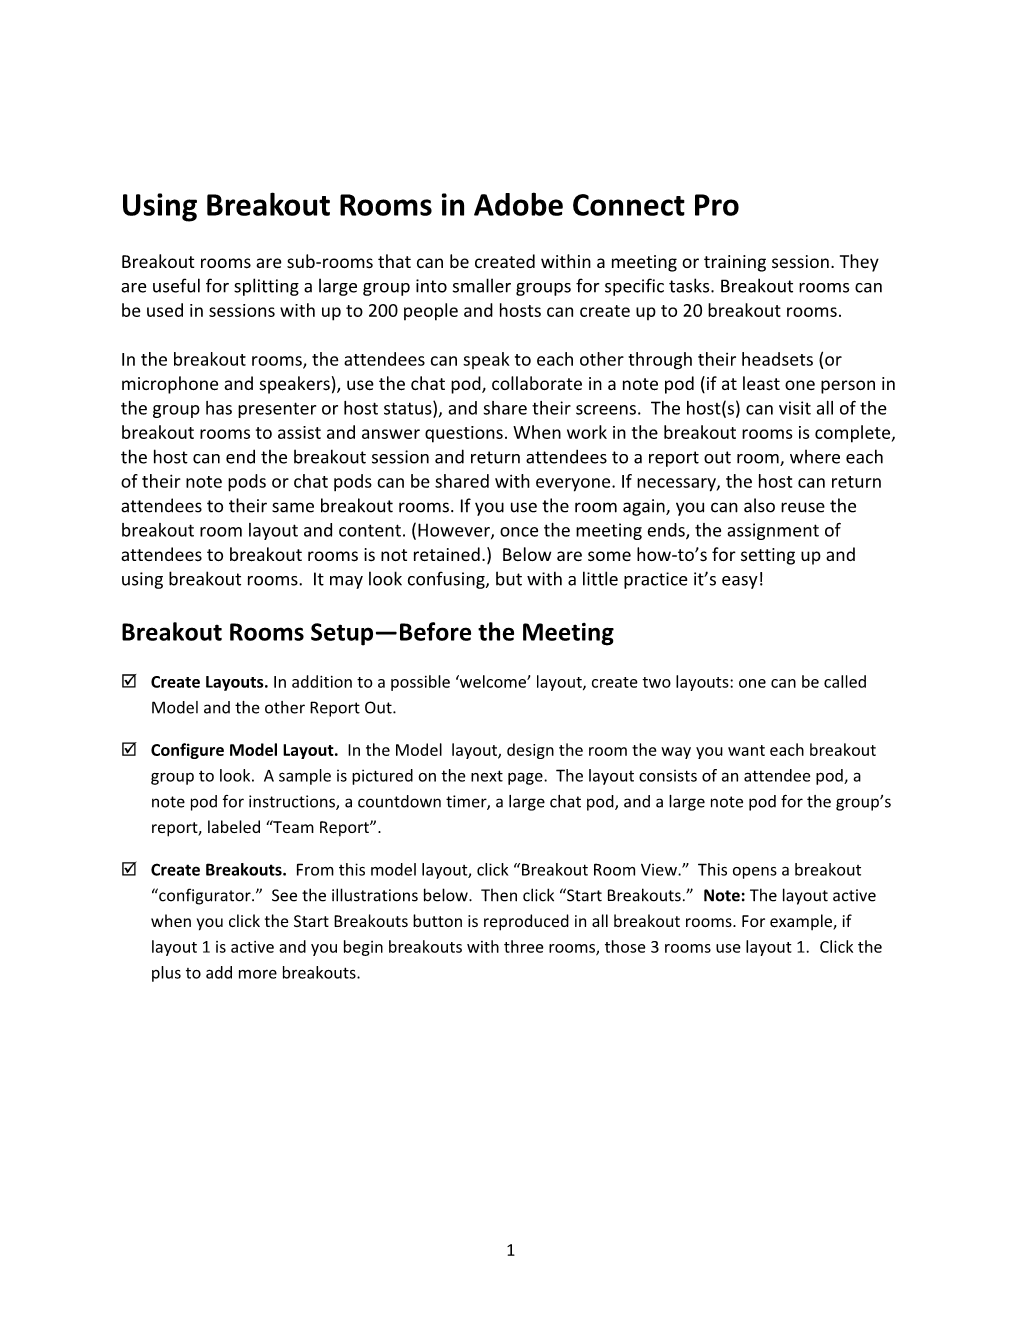 Using Breakout Rooms in Adobe Connect Pro